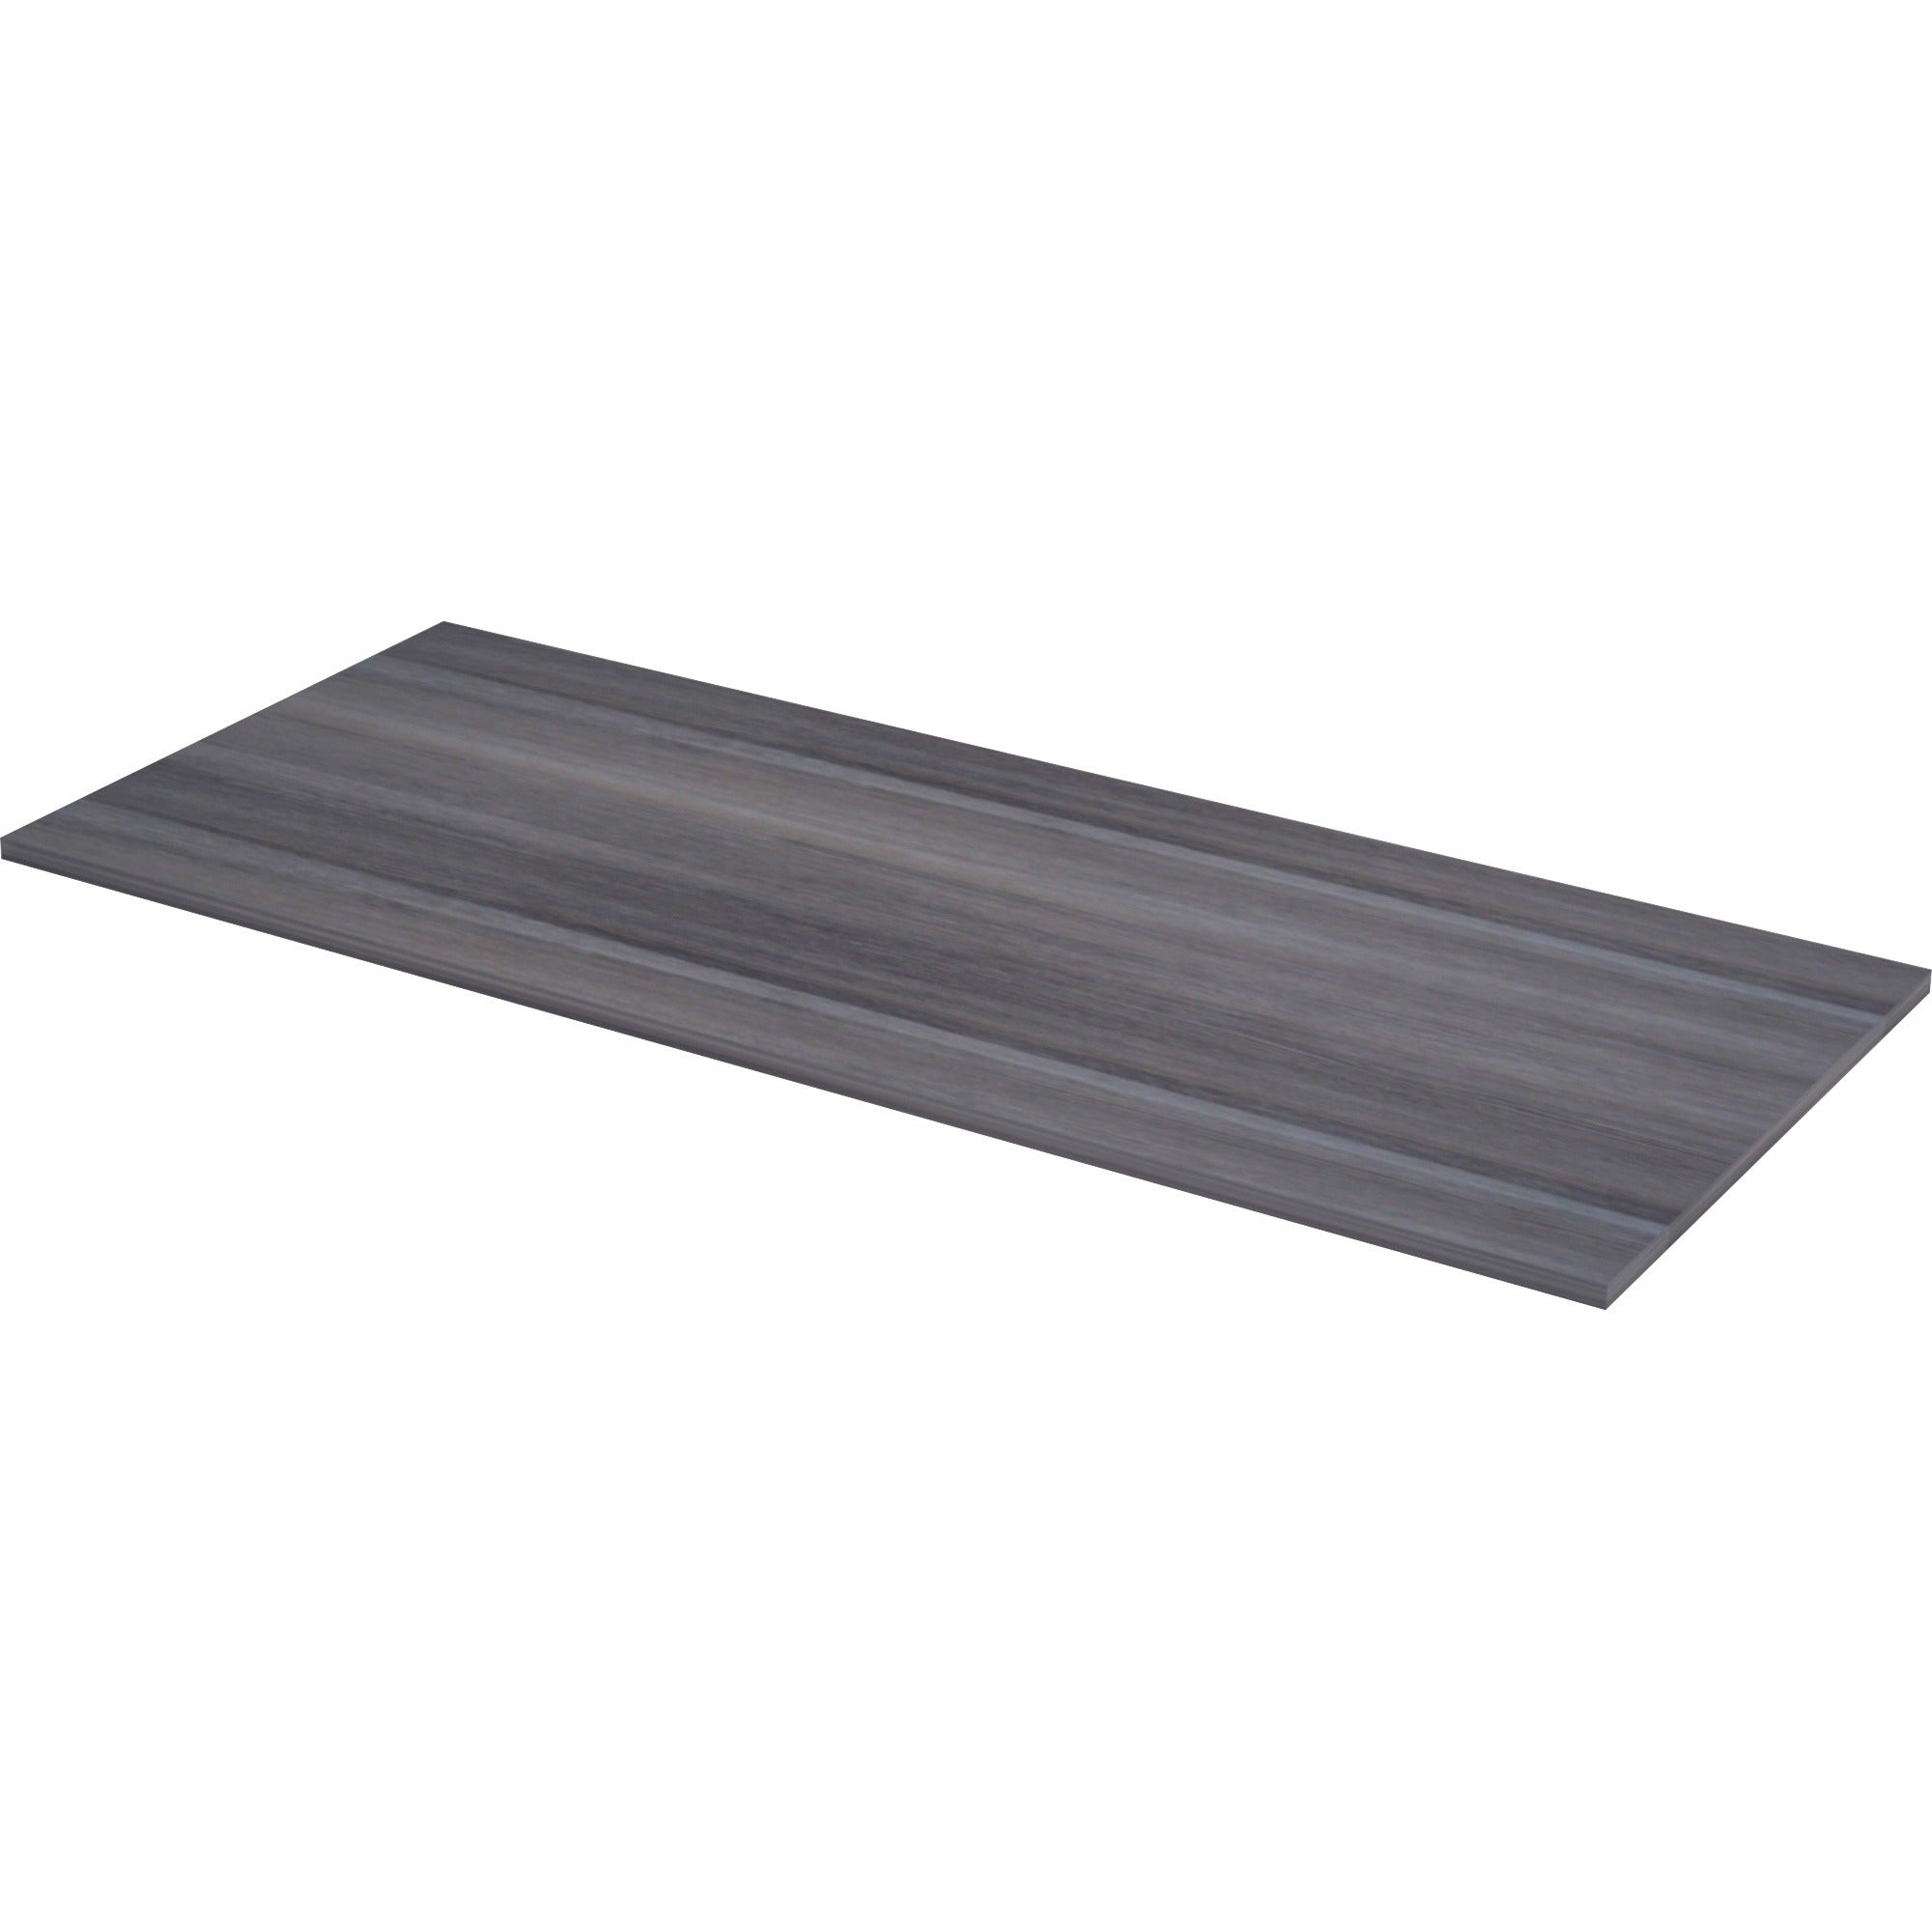 lorell-relevance-series-charcoal-laminate-office-furniture-72-x-30-table-top-straight-edge-material-polyvinyl-chloride-pvc-edge-finish-charcoal-laminate_llr16198 - 2